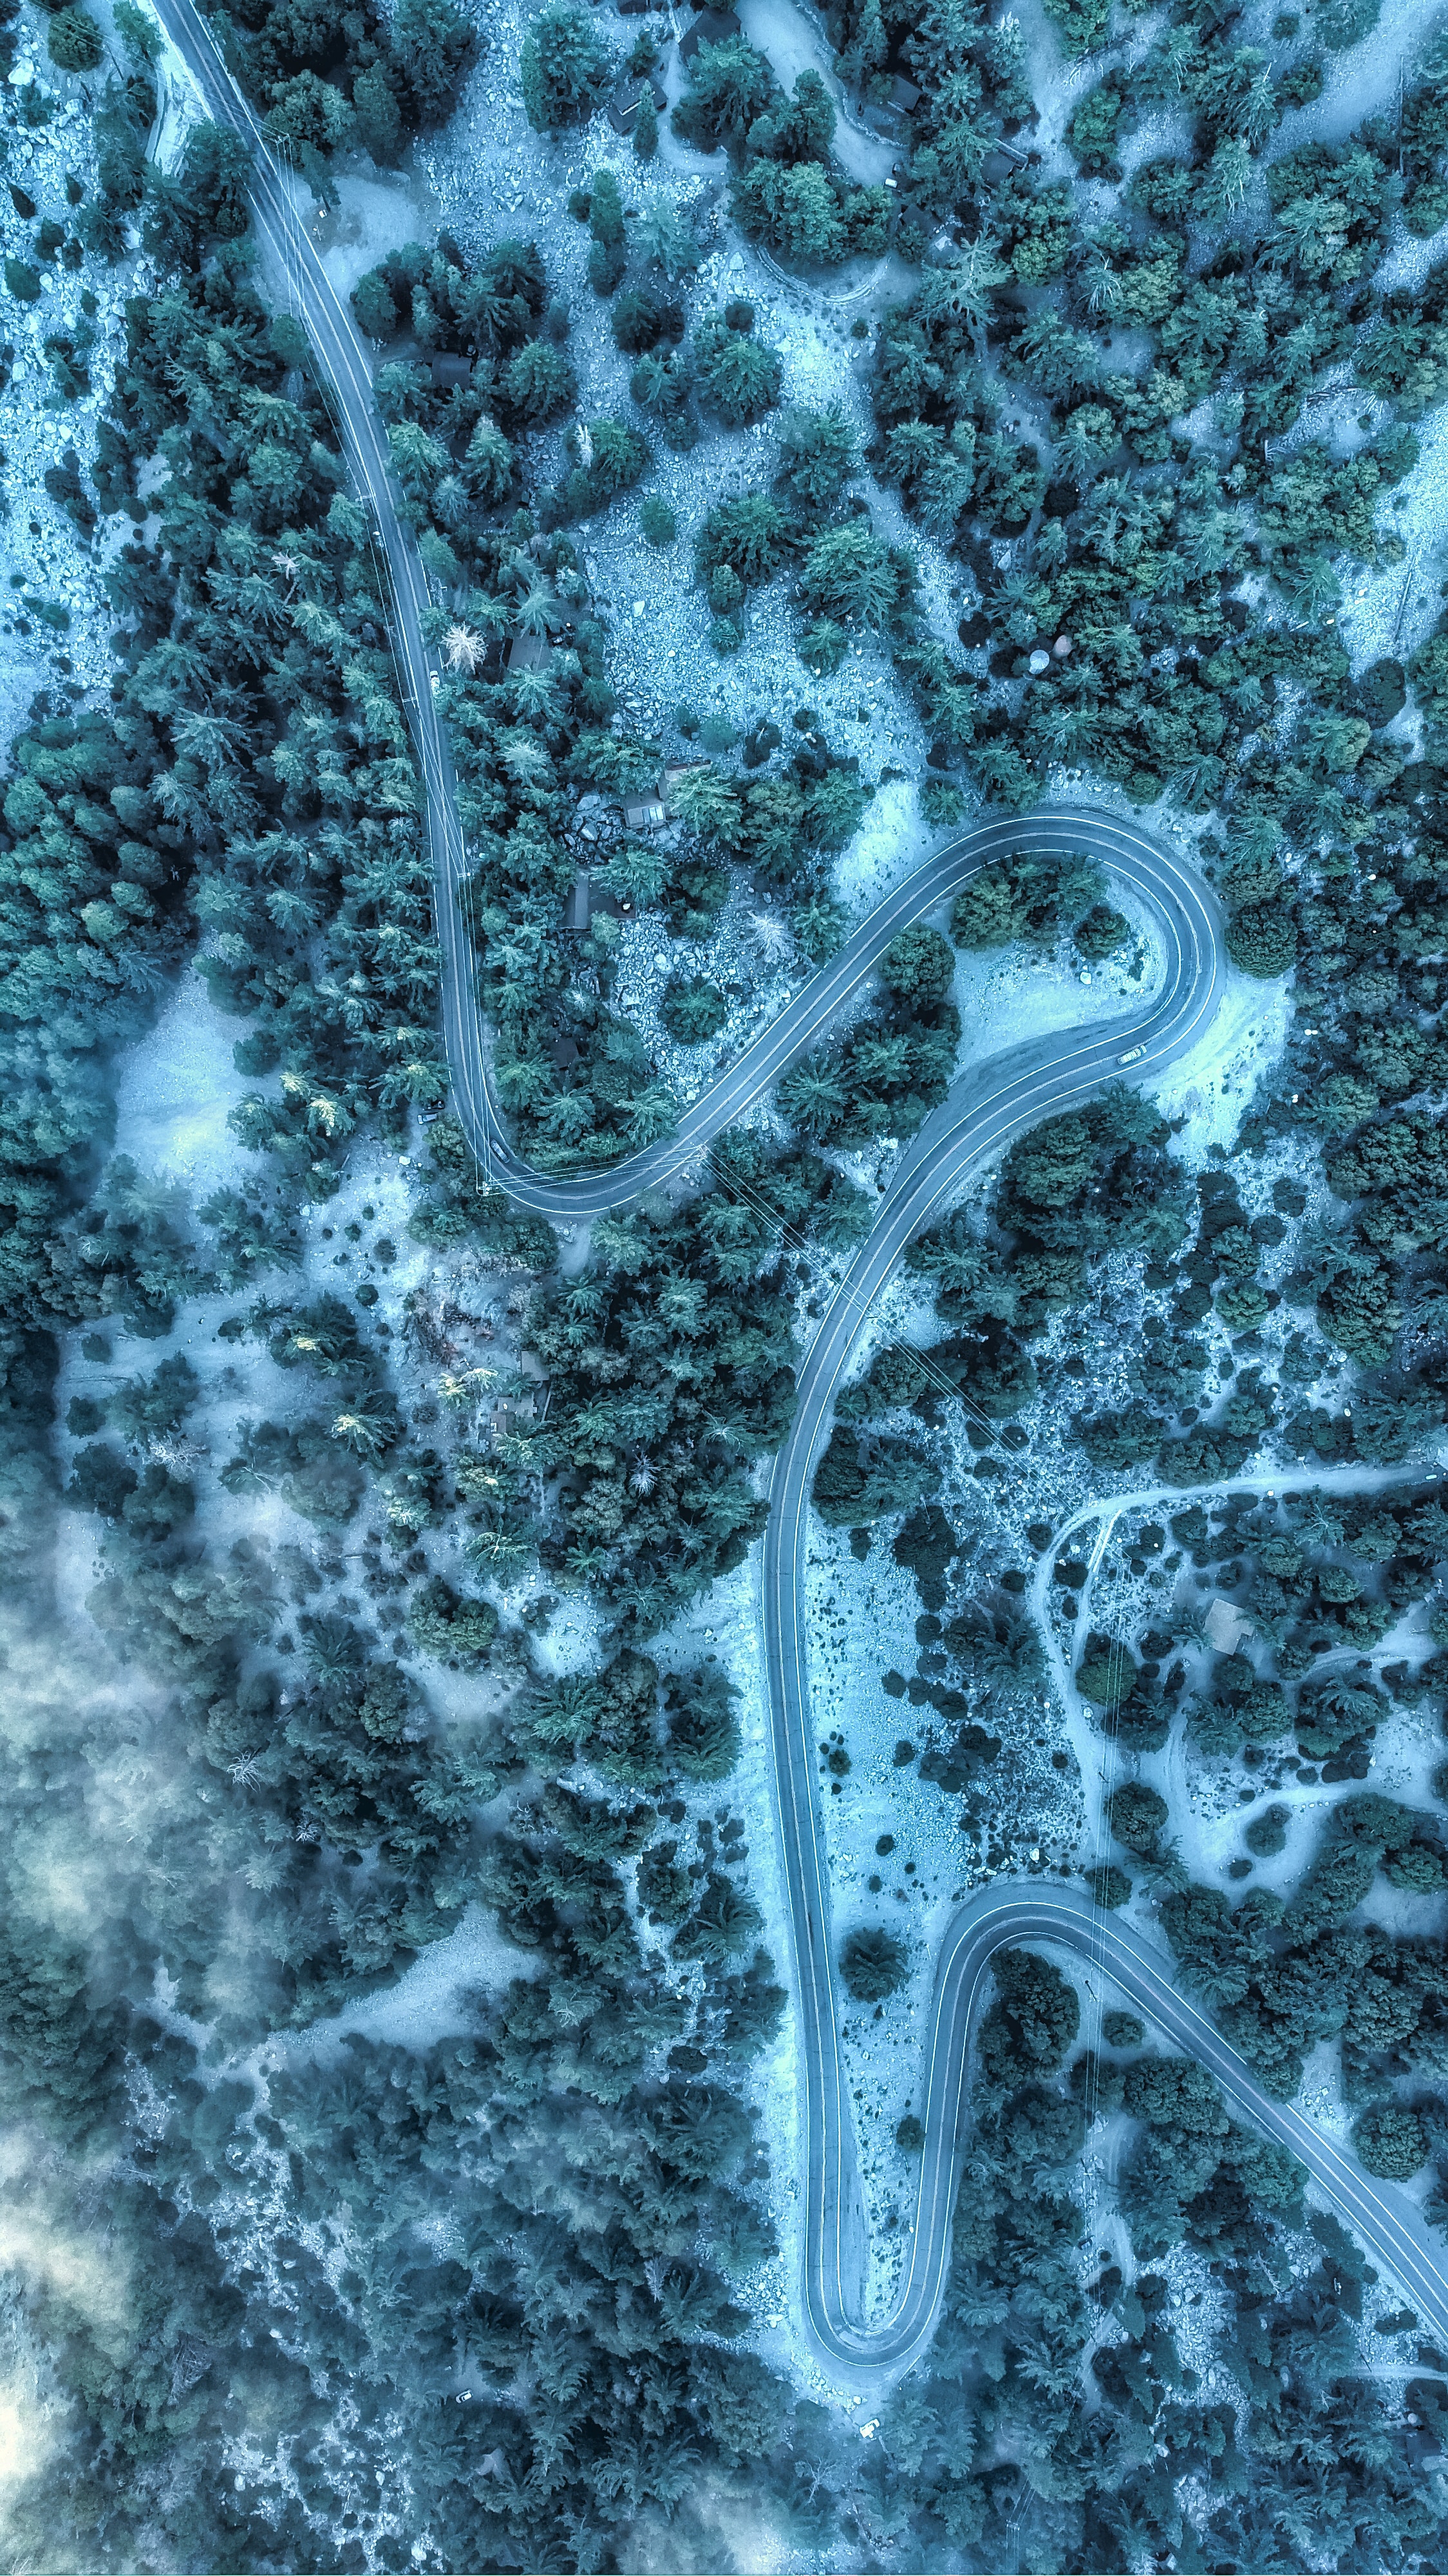 New Lock Screen Wallpapers tops, nature, trees, view from above, top, road, winding, sinuous